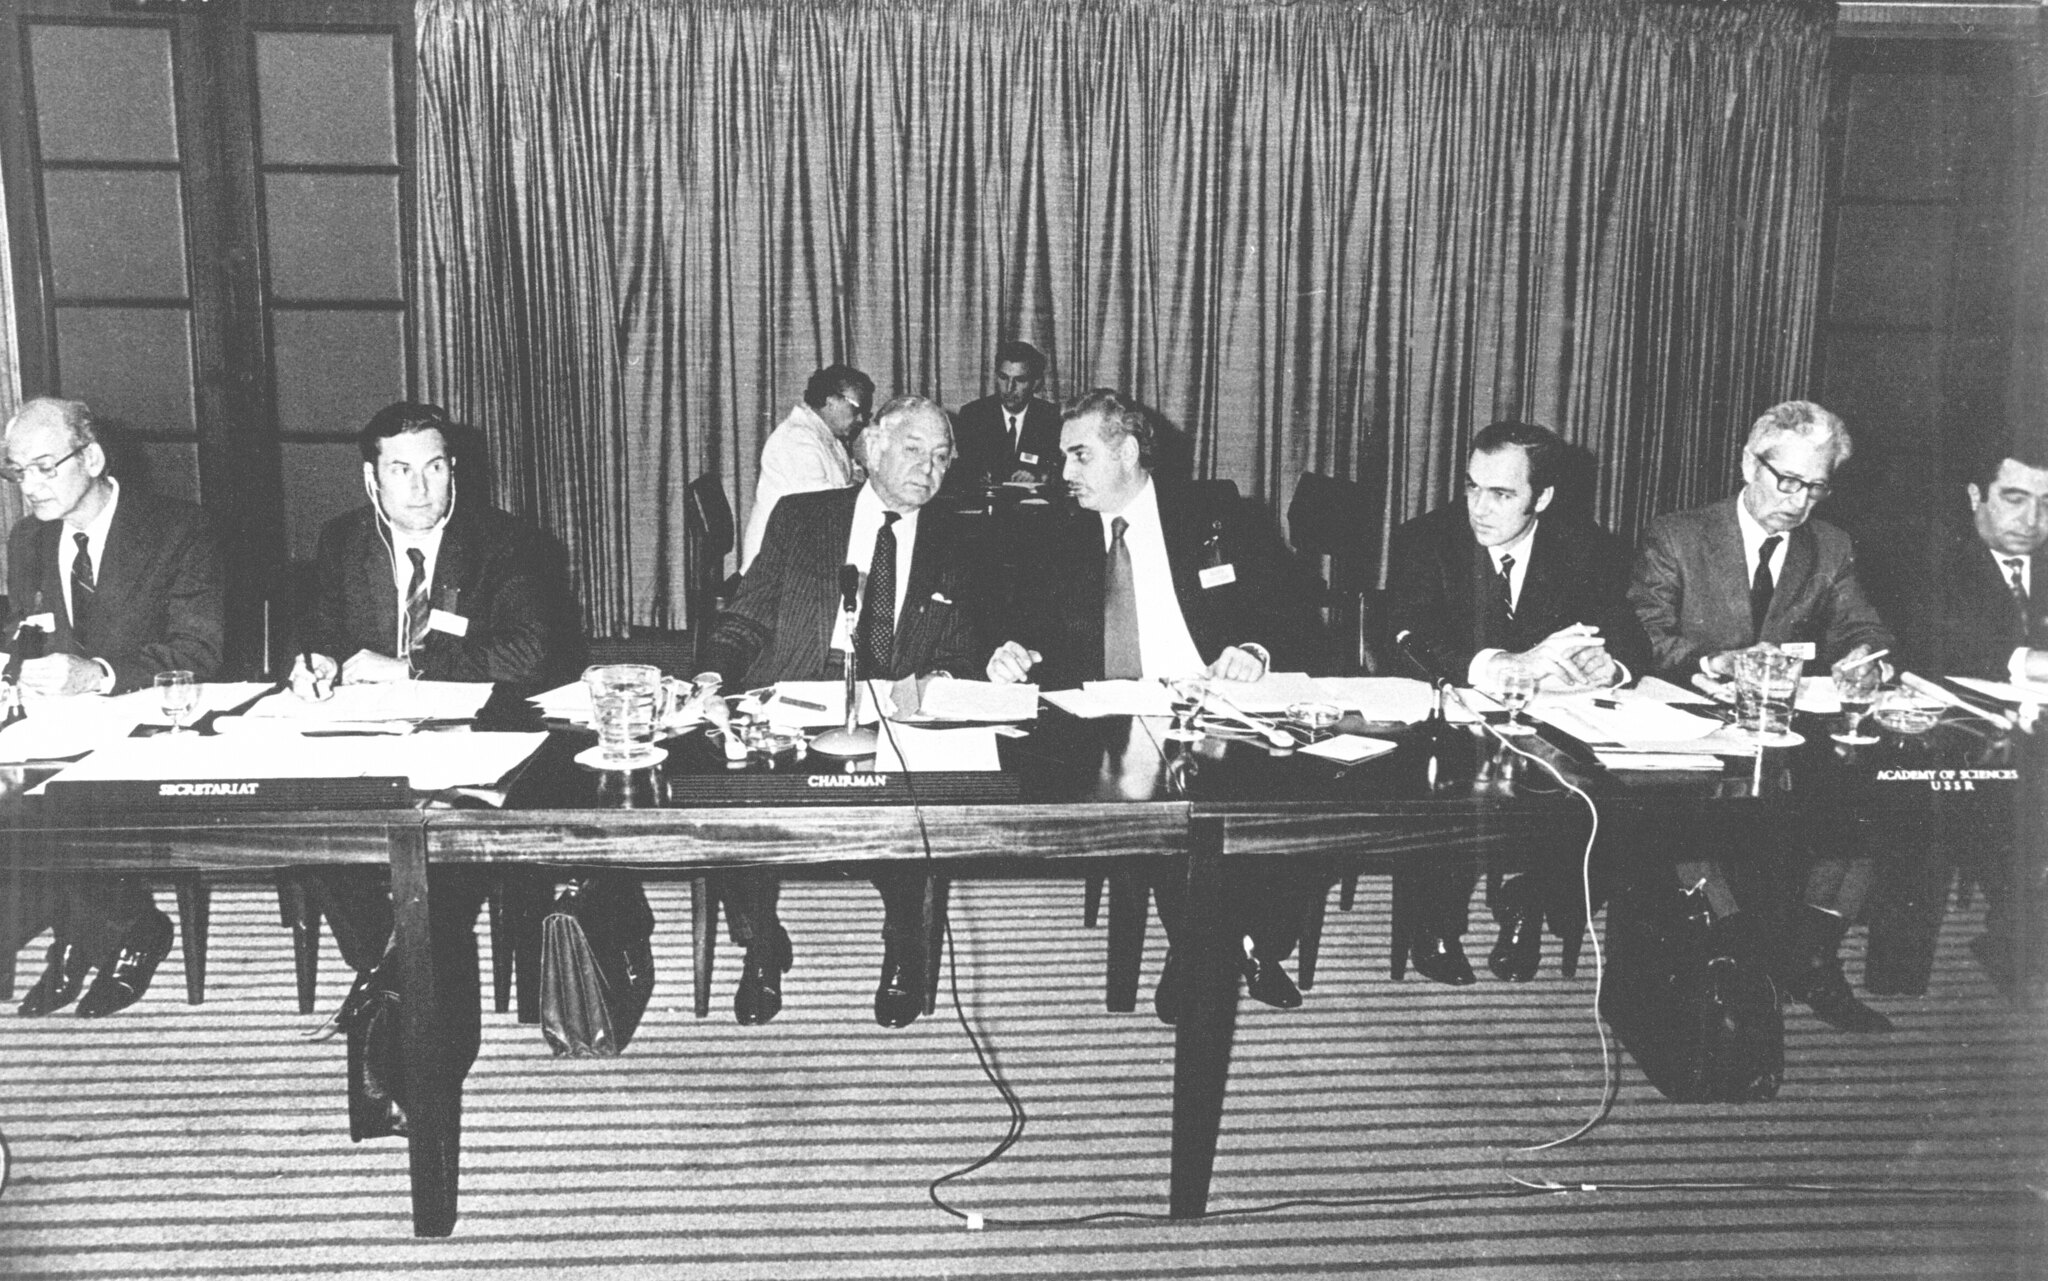 Signing the IIASA charter in 1972